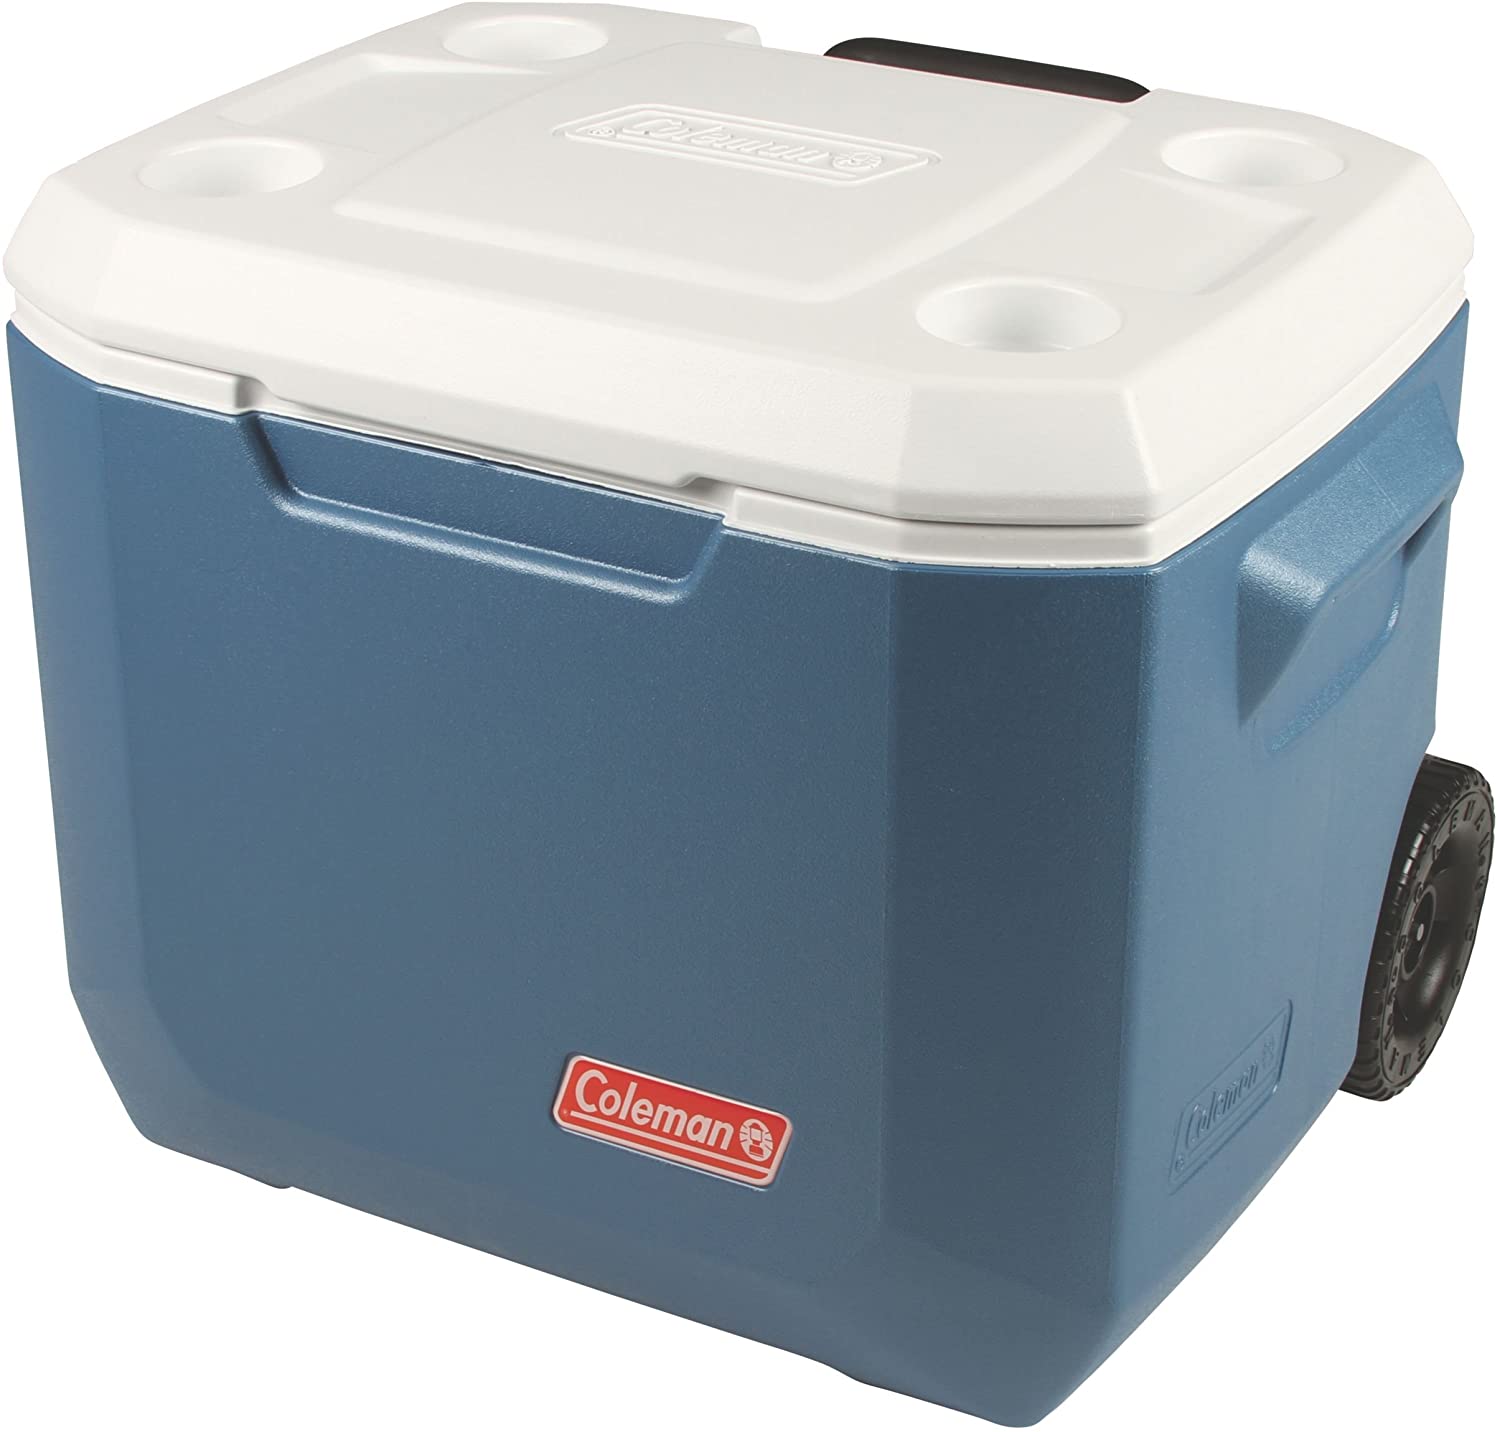 Coleman Portable Cooler with Wheels Xtreme Wheeled Cooler, 50Quart